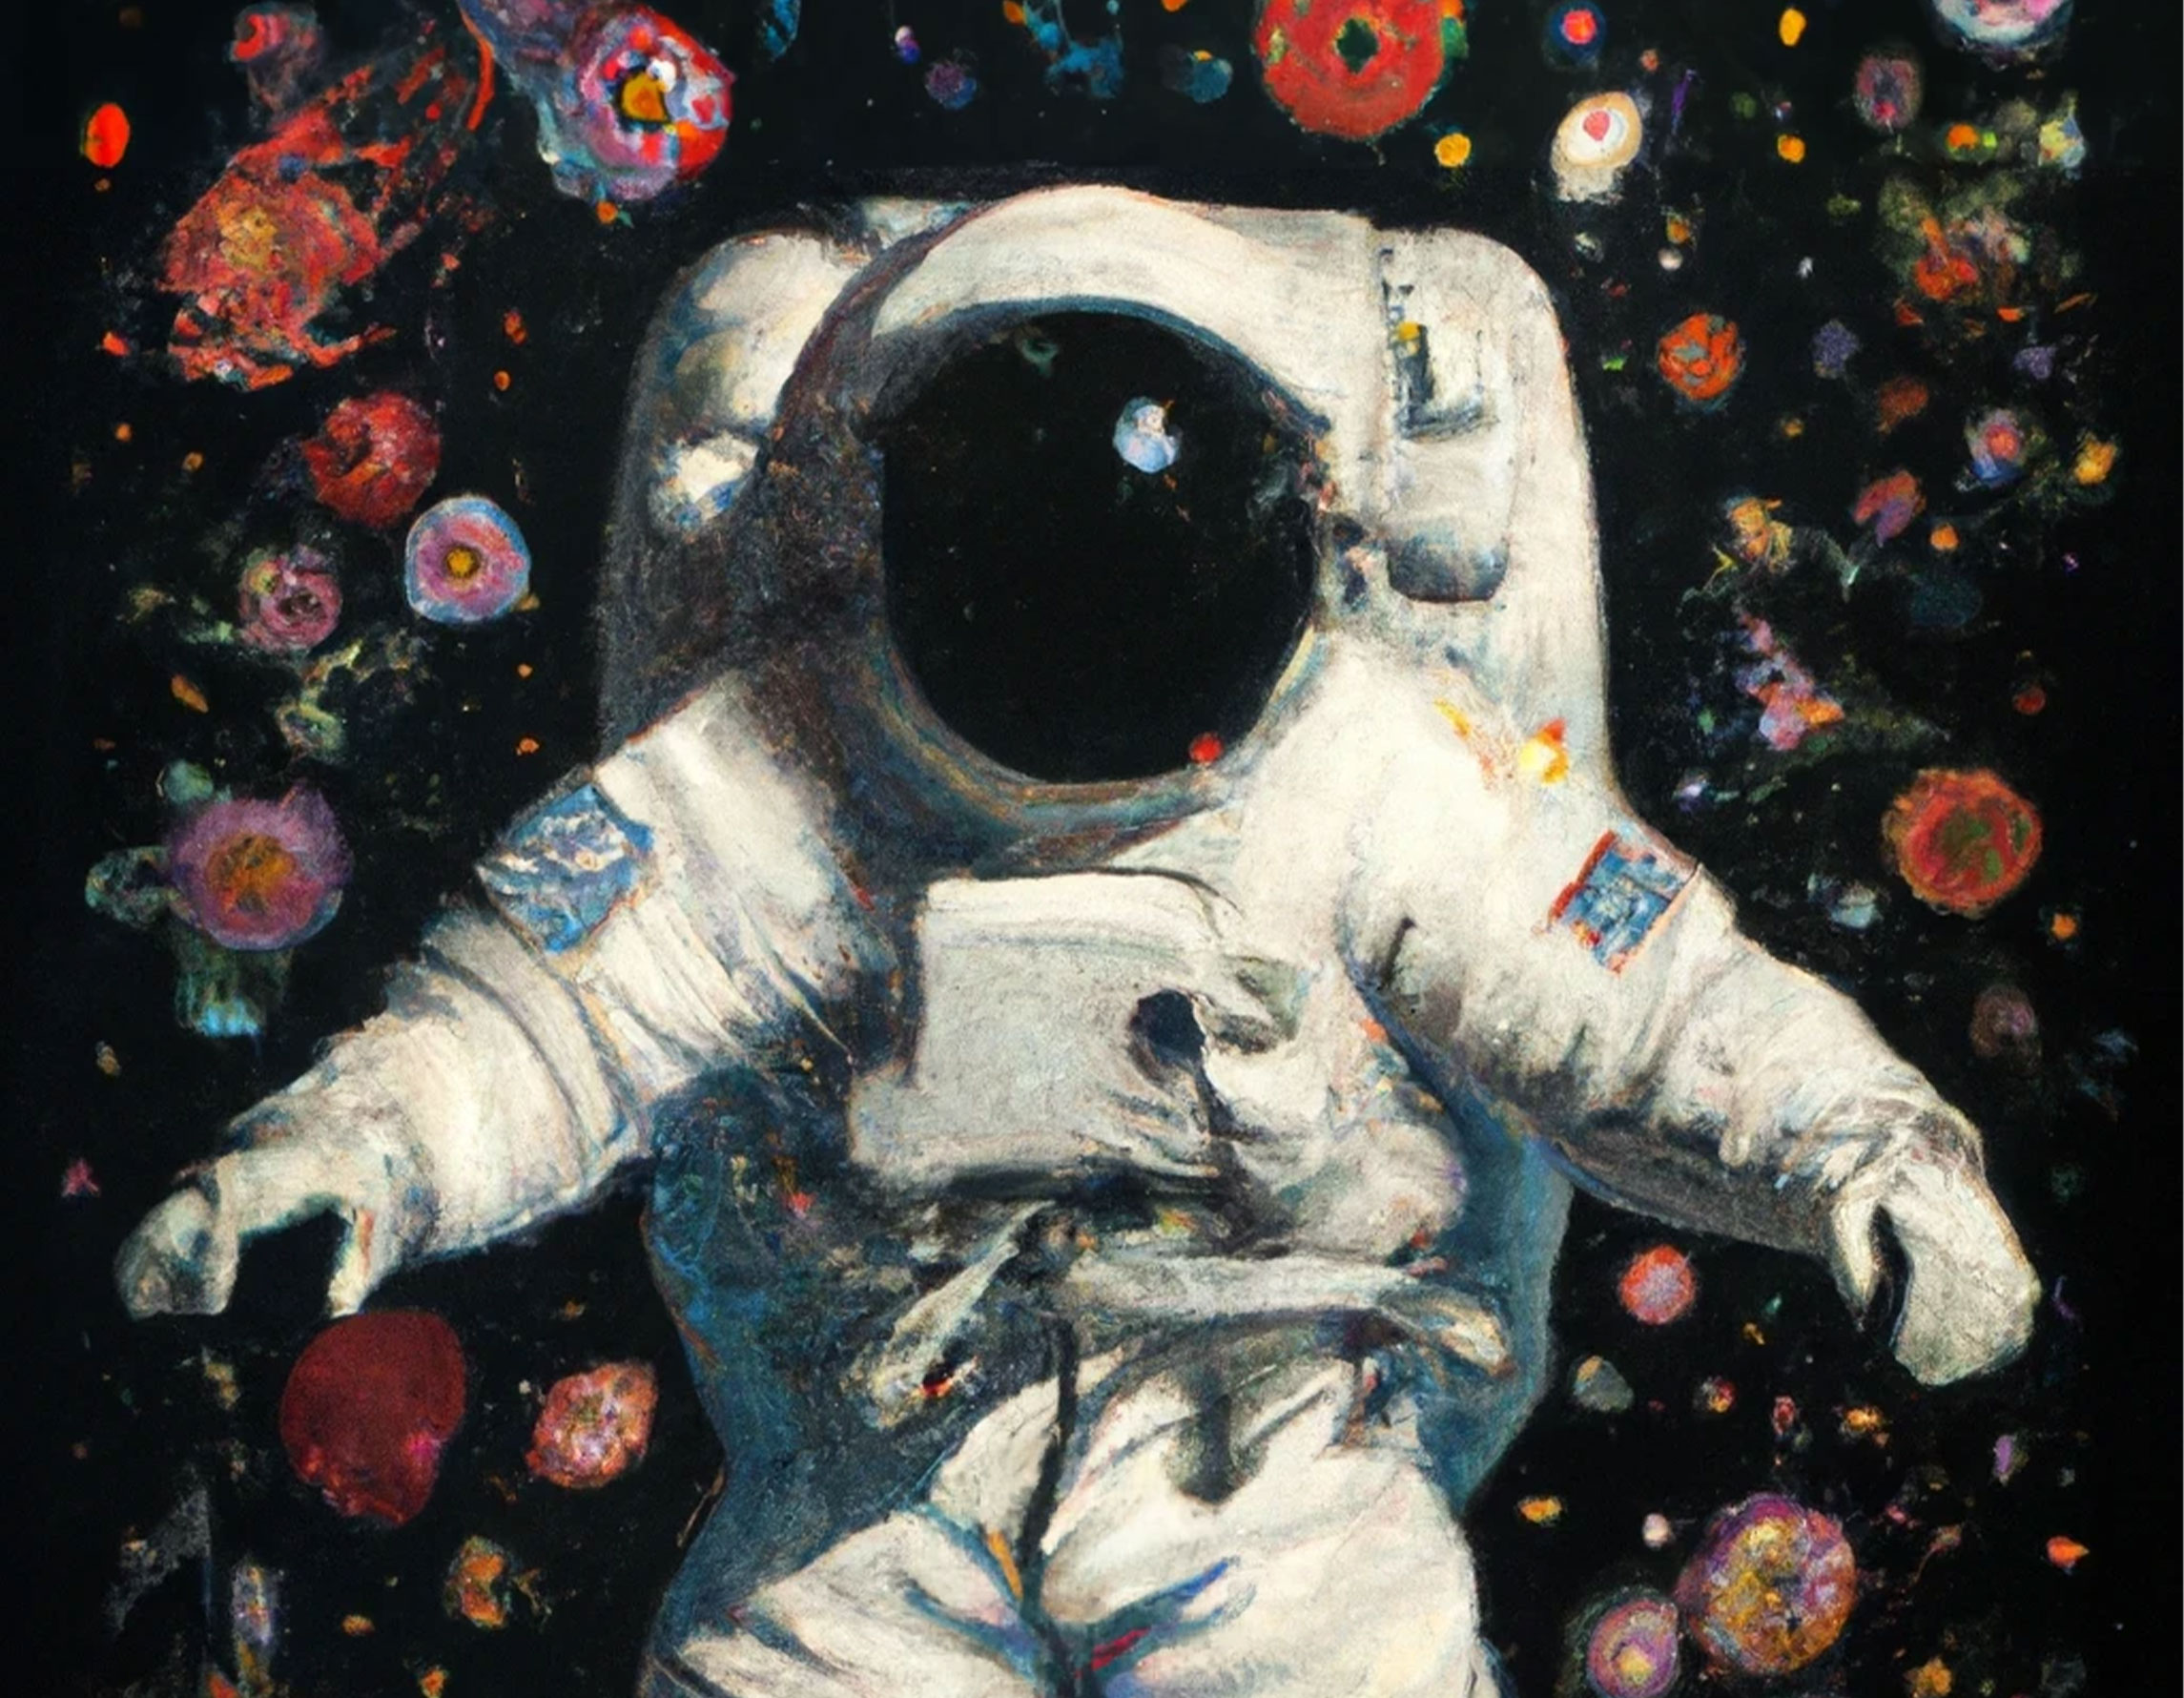 Art showing an astronaut in space